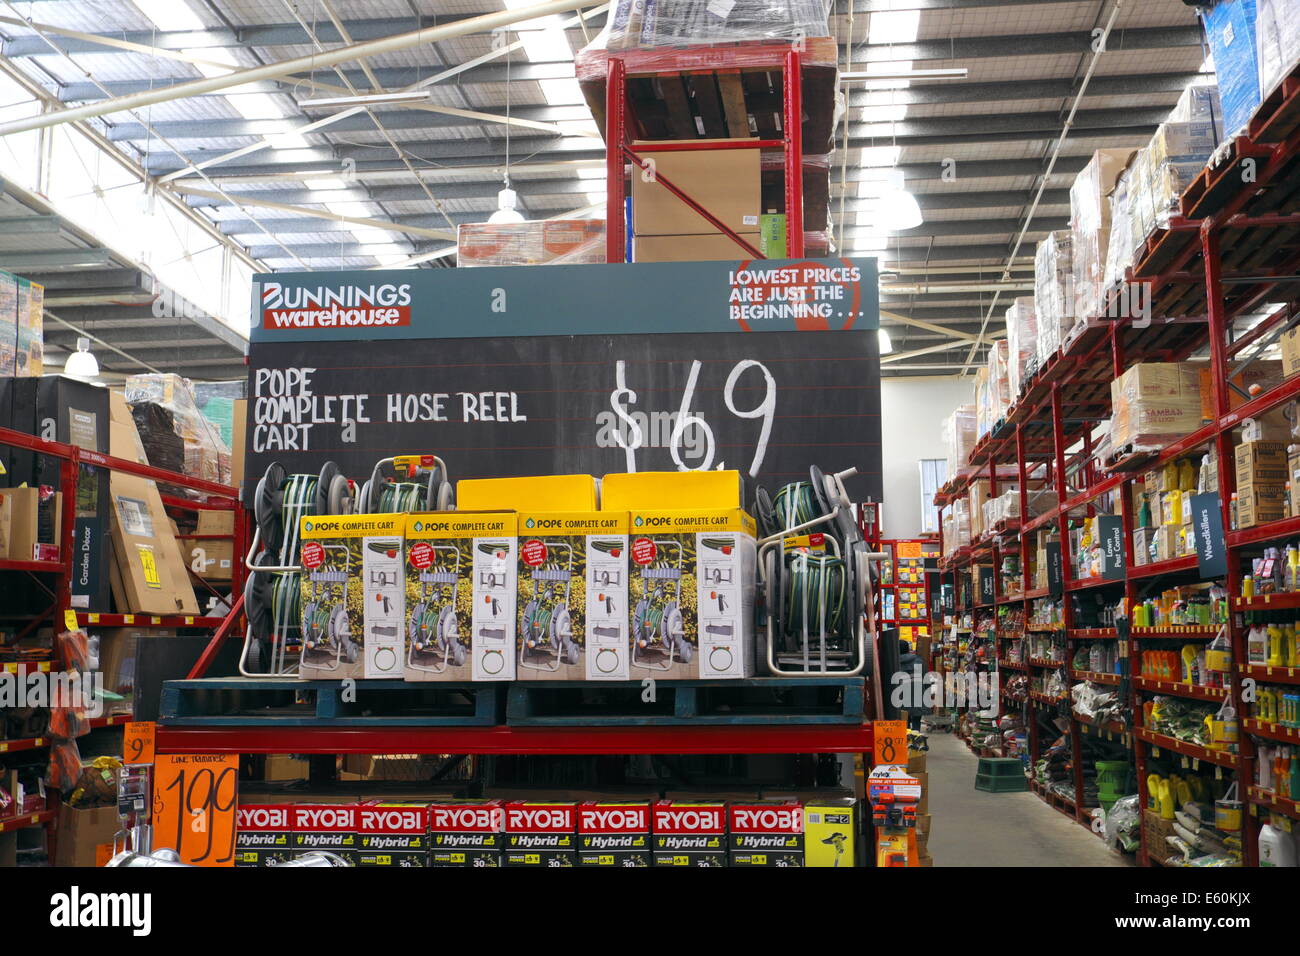 Bunnings Warehouse  is a national DIY retailer owned by Wesfarmers, it sells tools, timber, equipment for builders and home owners, sydney Stock Photo